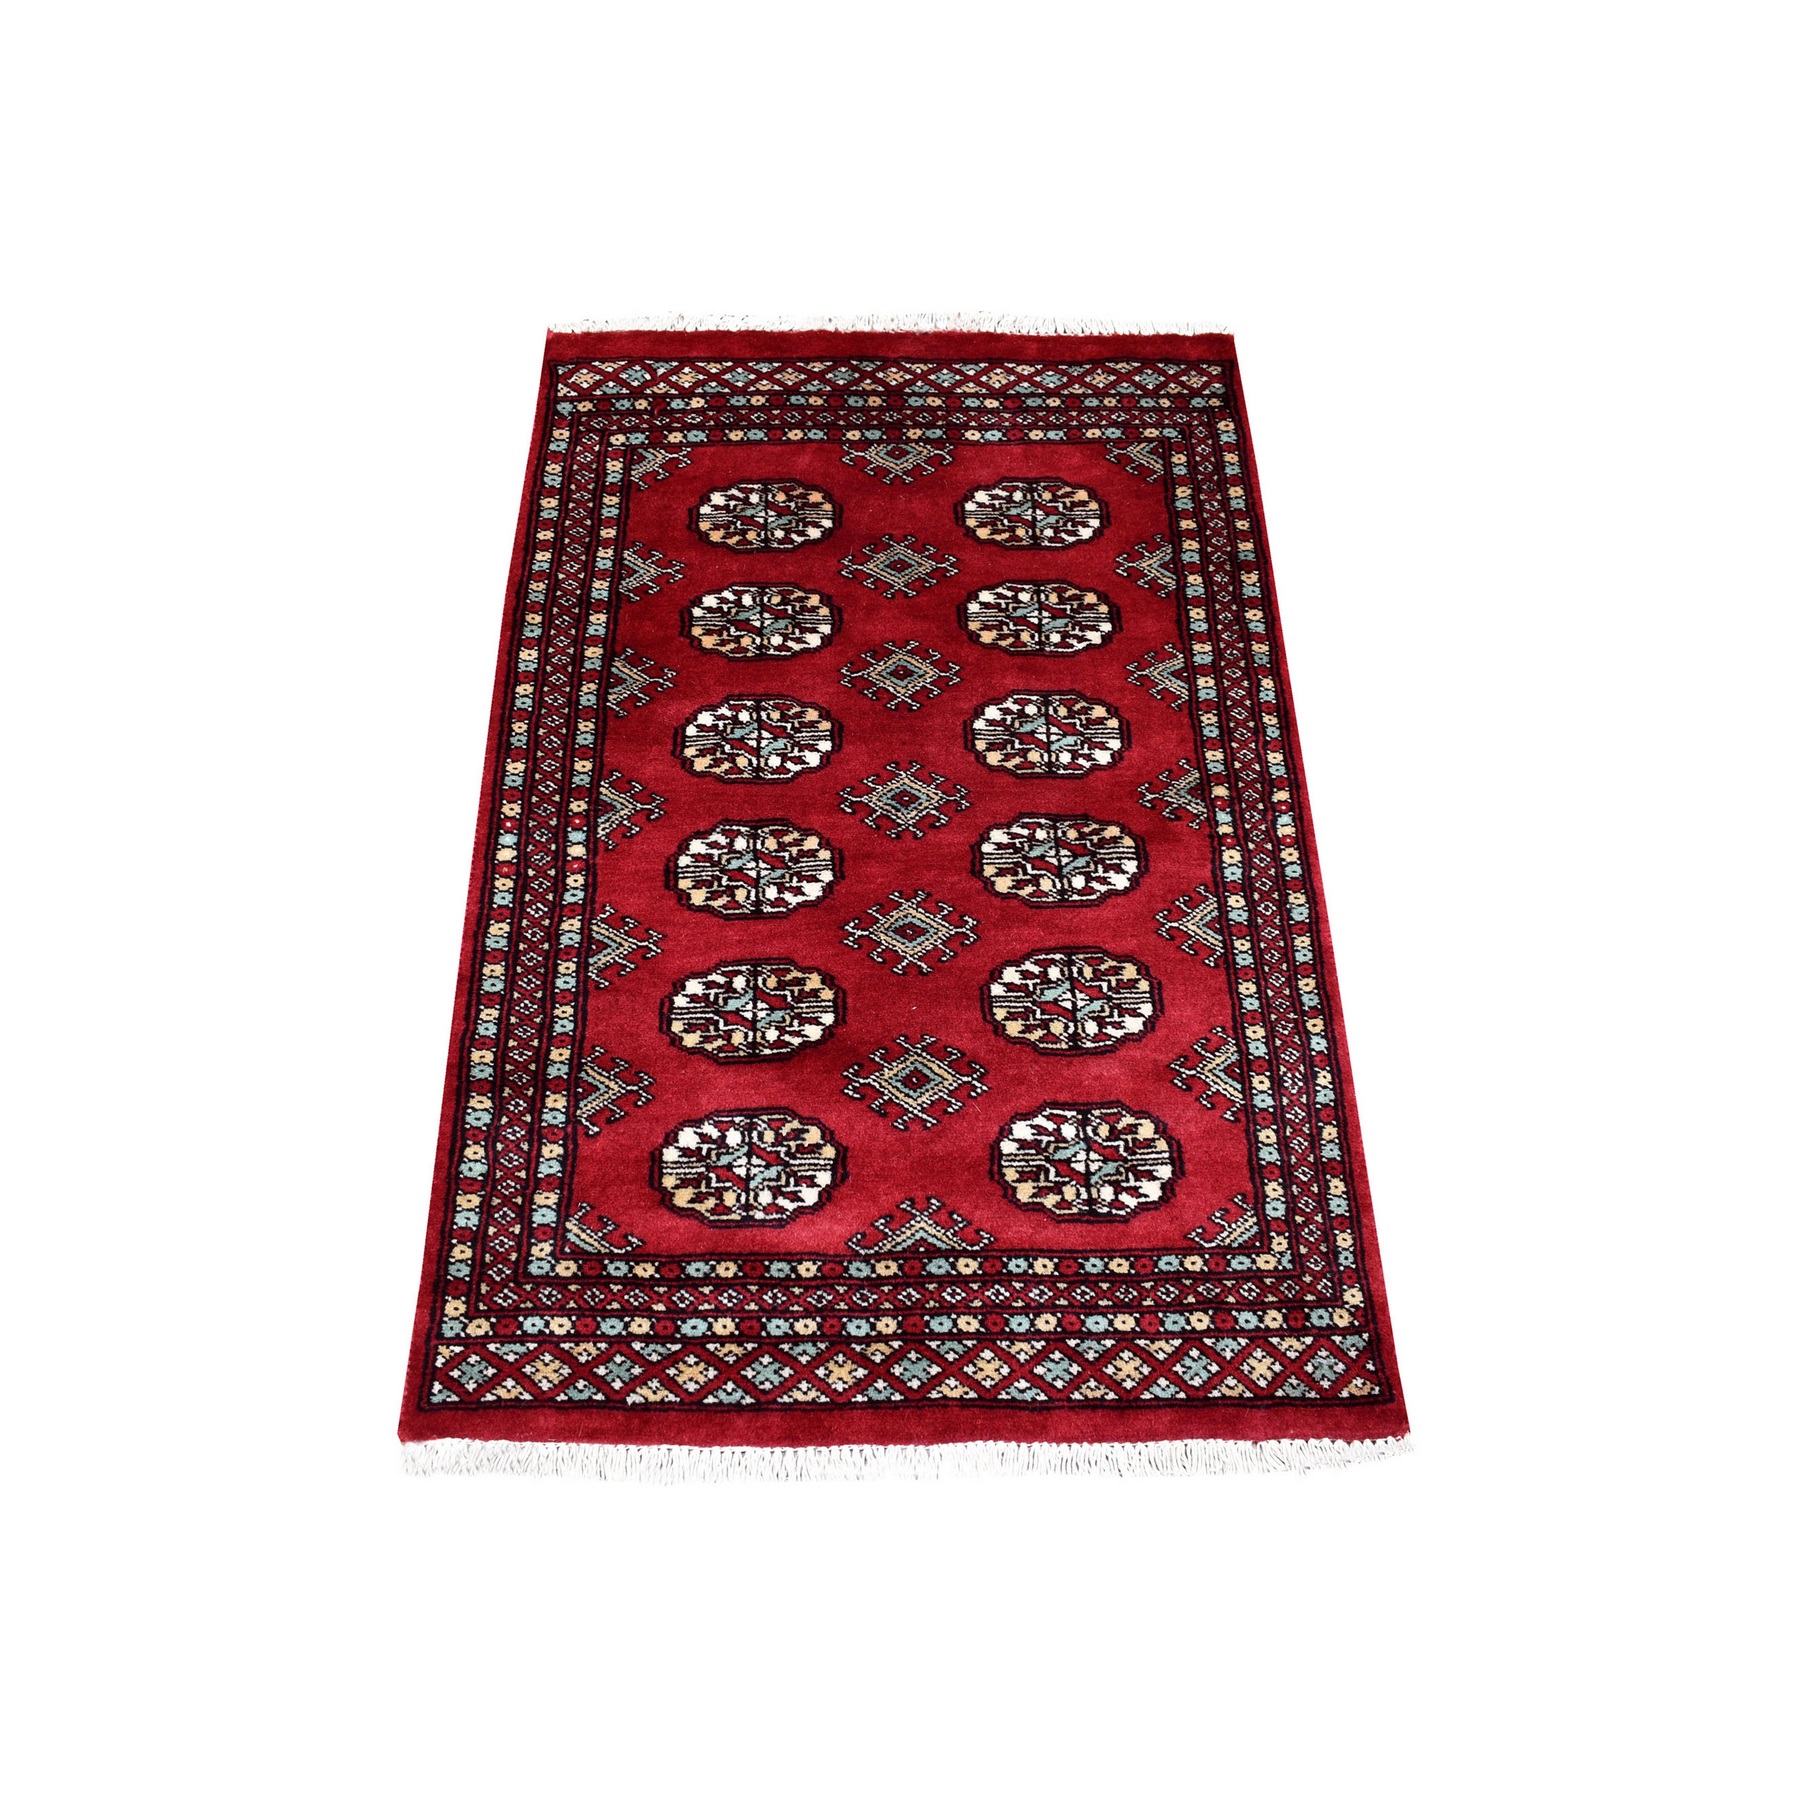 2'6"x3'9" Rich Red Denser Weave 250 KPSI Hand Woven Pure Afghan Wool Hand Woven Oriental Rug 